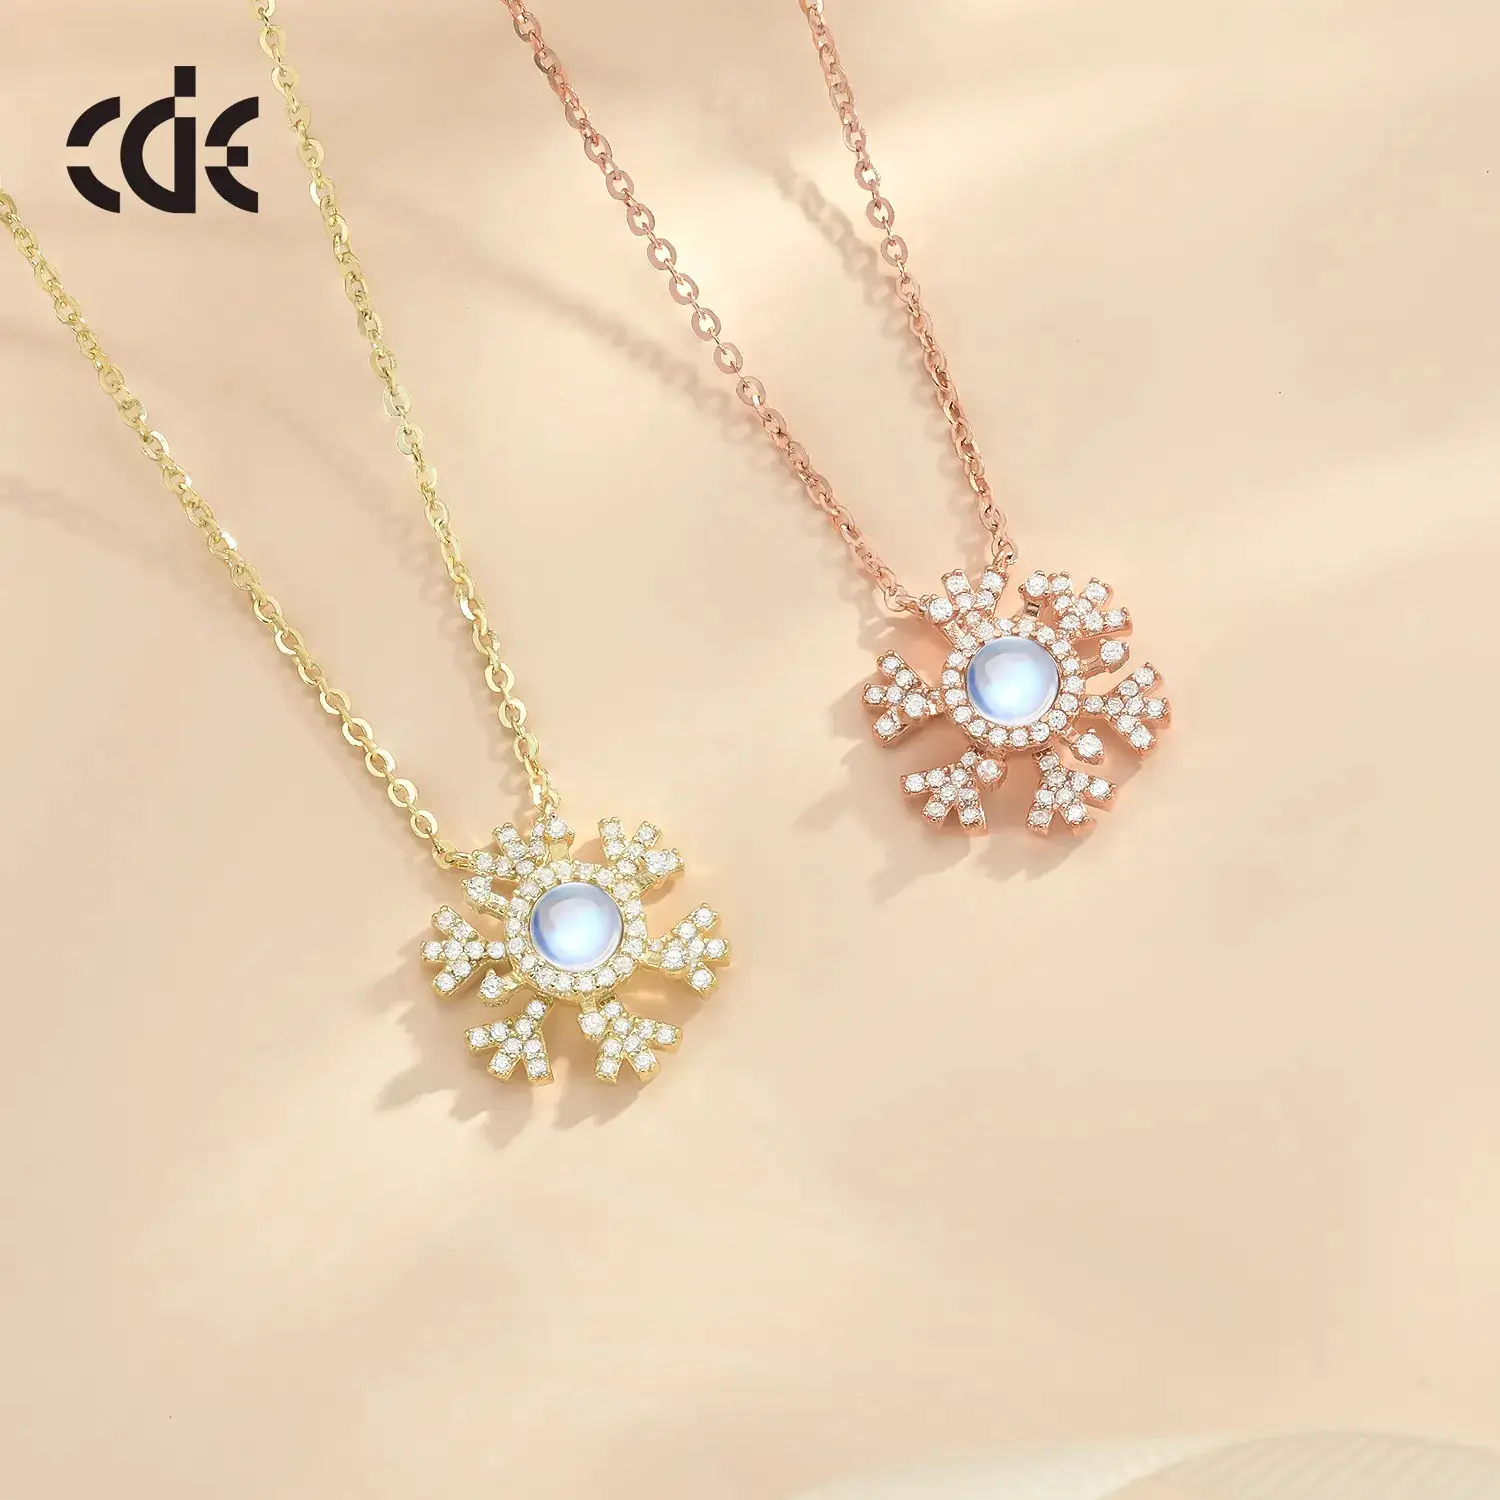 CDE GMYN001 Fine Jewelry 925 Sterling Silver Necklace Wholesale 14K Gold Plated Moonstone Snow Christmas Pendant Necklace